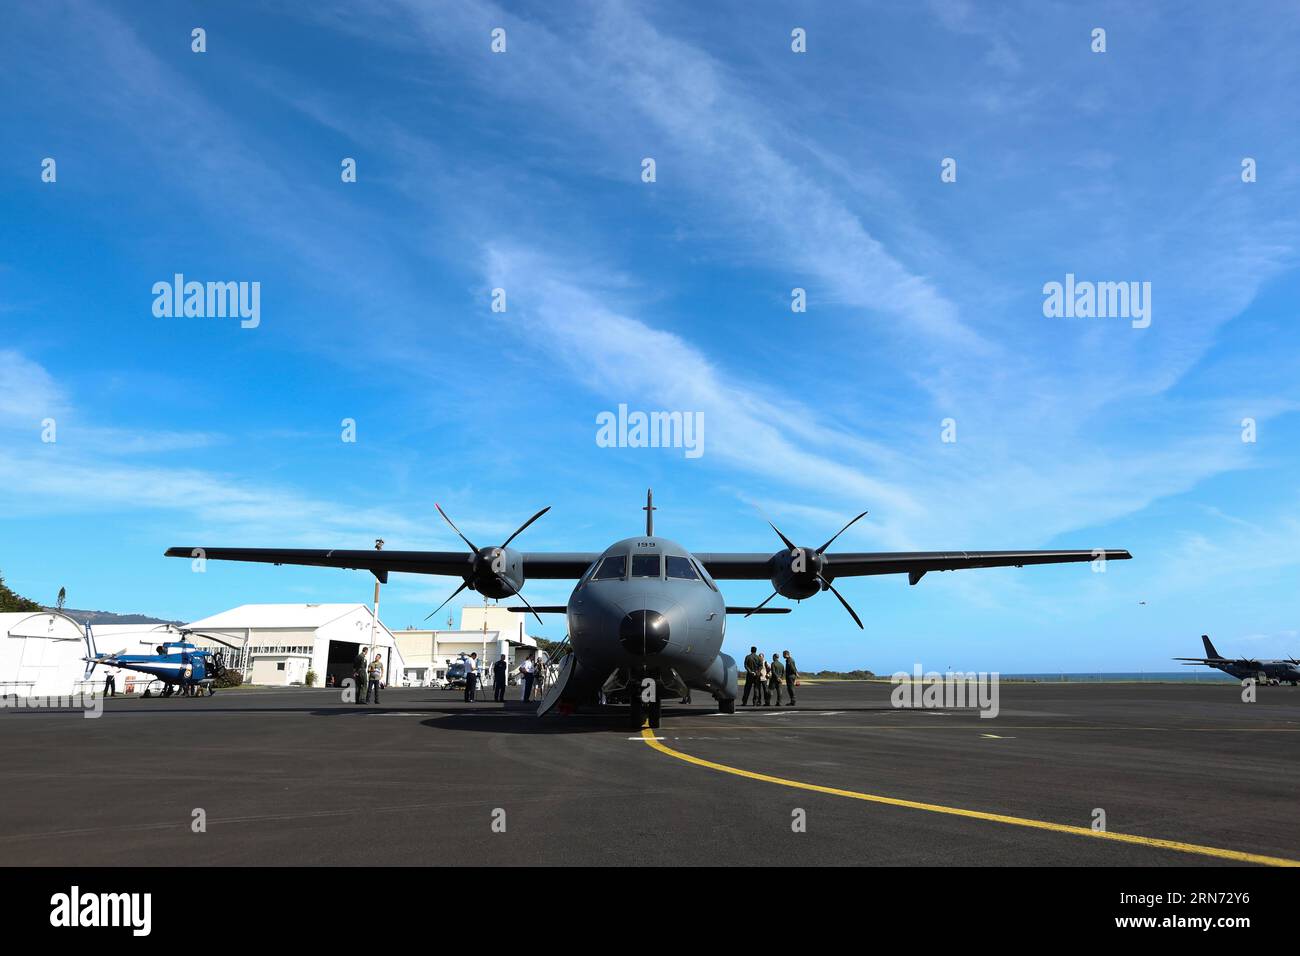 (150814) -- LA REUNION, Aug. 14, 2015 -- A CASA search plane taking part in the searching mission is seen at an airport in Saint Denis, La Reunion, Aug. 14, 2015. The administrator of Reunion Island Dominique Sorain told the media on Friday the active search for more MH370 debris will continue until Monday. No debris related to the plane has been found in the sea during the 35 hours of a combined search by a CASA search plane of French army and three helicopters, he said. ) (djj) LA REUNION-MH370 DEBRIS-SEARCH PanxSiwei PUBLICATIONxNOTxINxCHN   150814 La Reunion Aug 14 2015 a Casa Search Plane Stock Photo